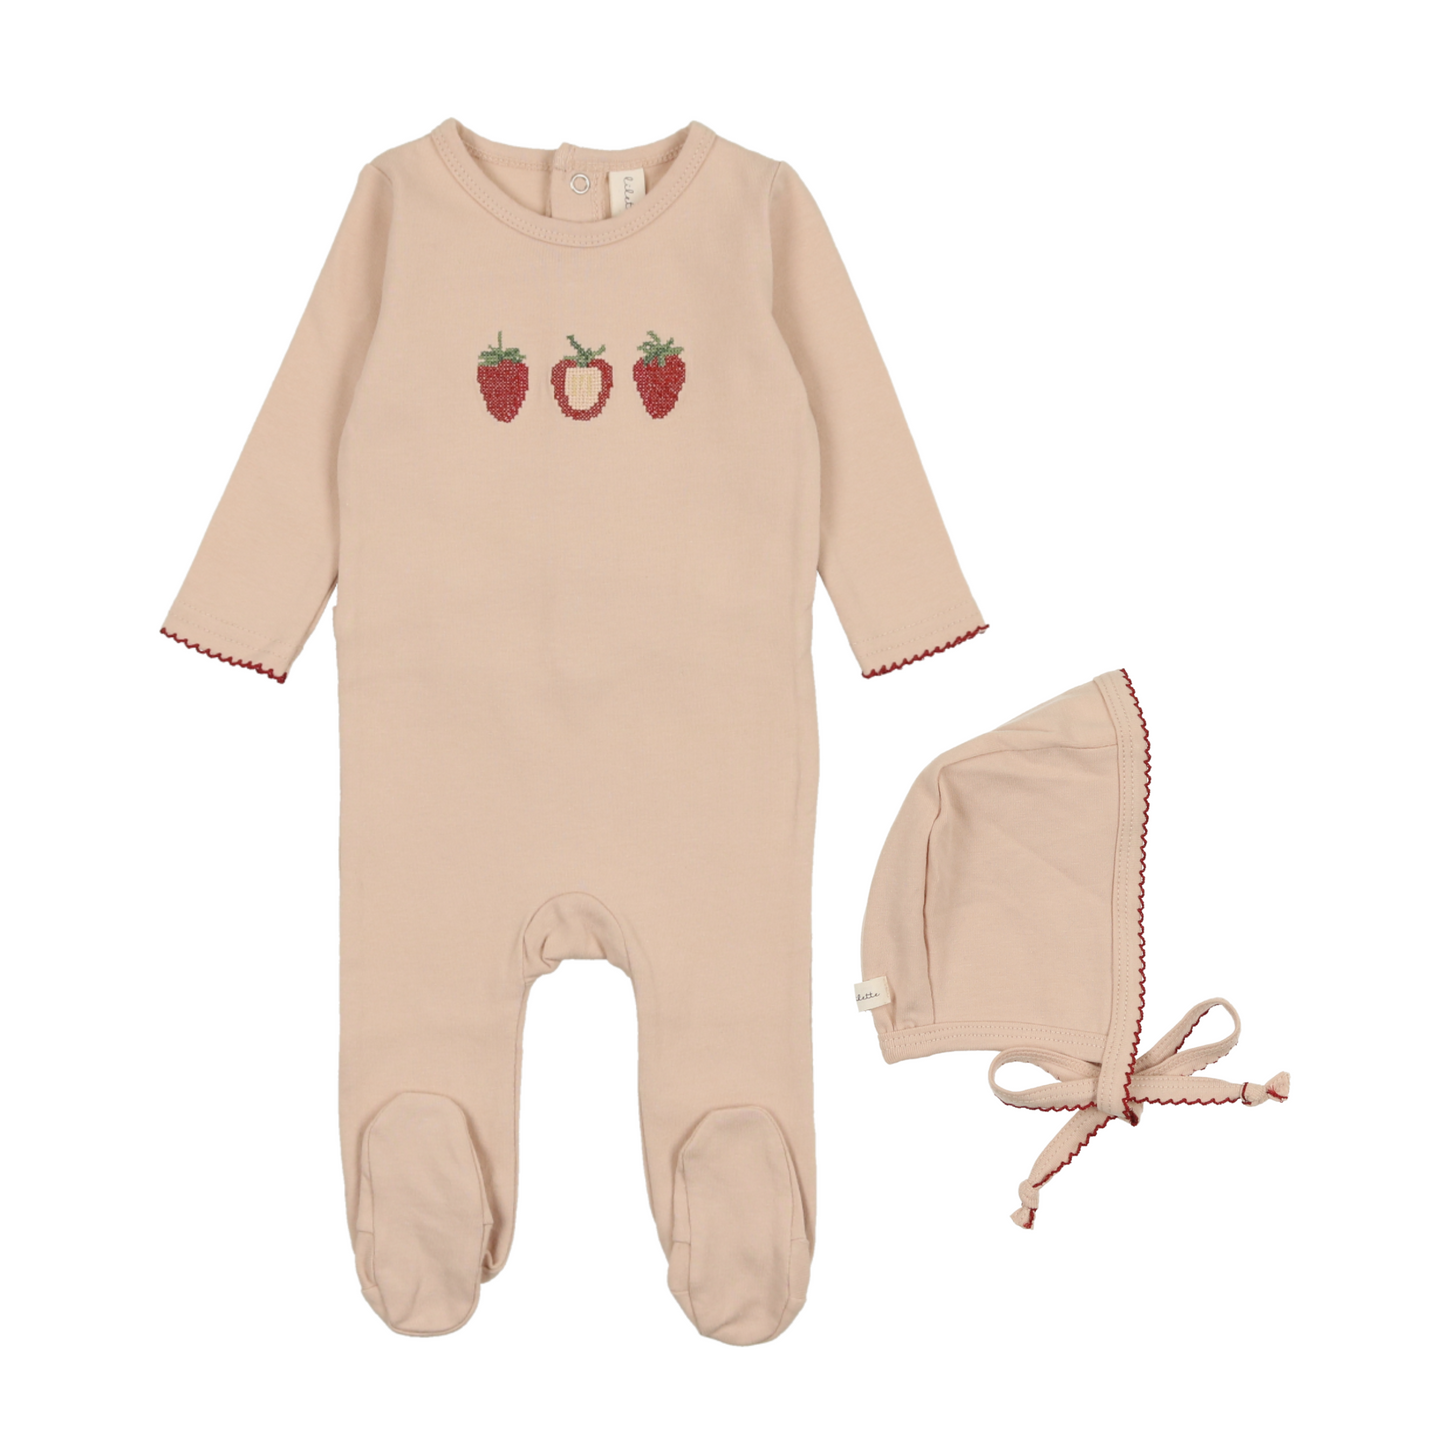 Embroidered Fruit Footie Set Peach/Strawberry